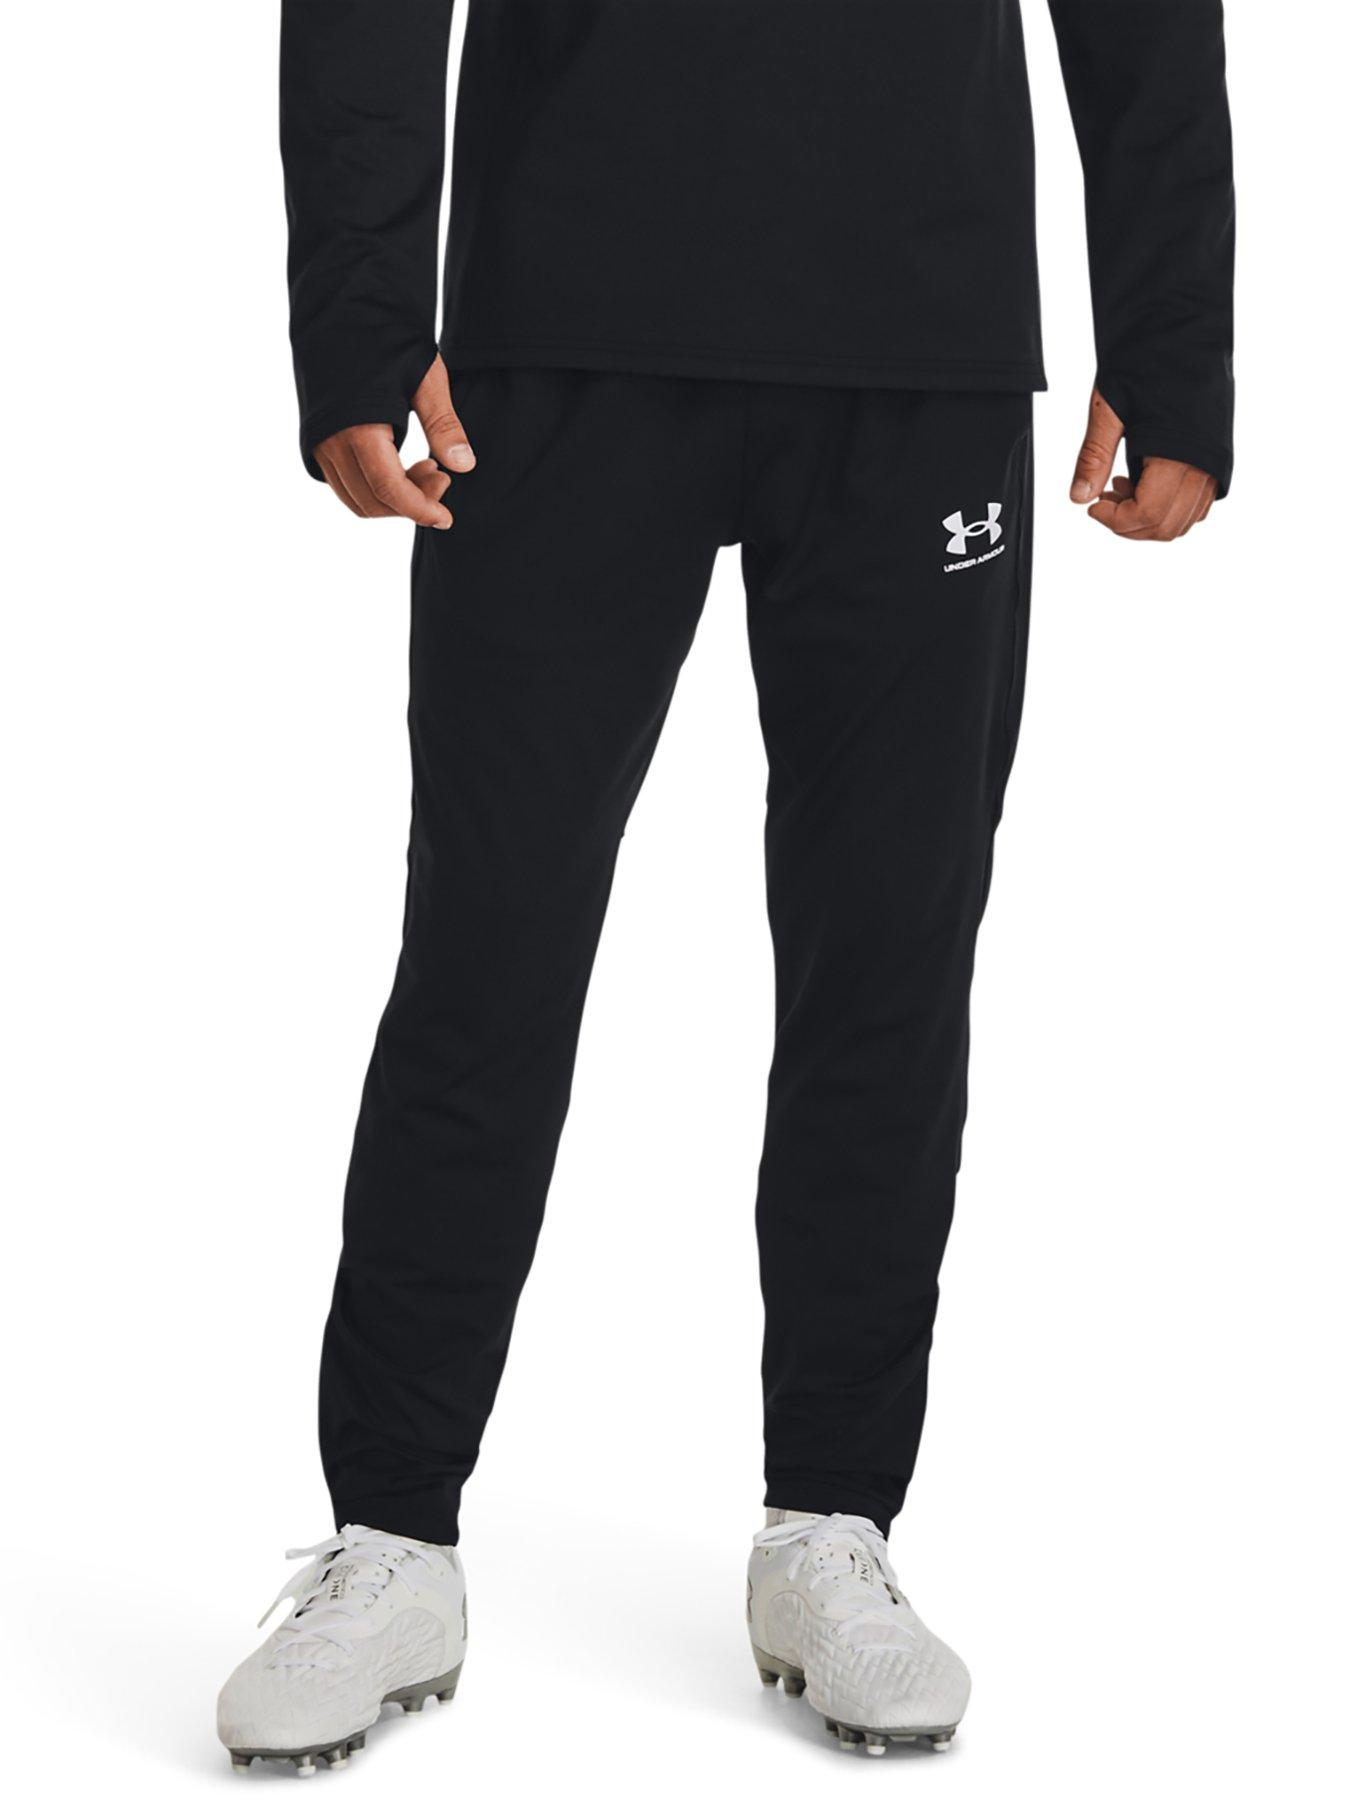 UNDER ARMOUR Mens Challenger Pant - Navy